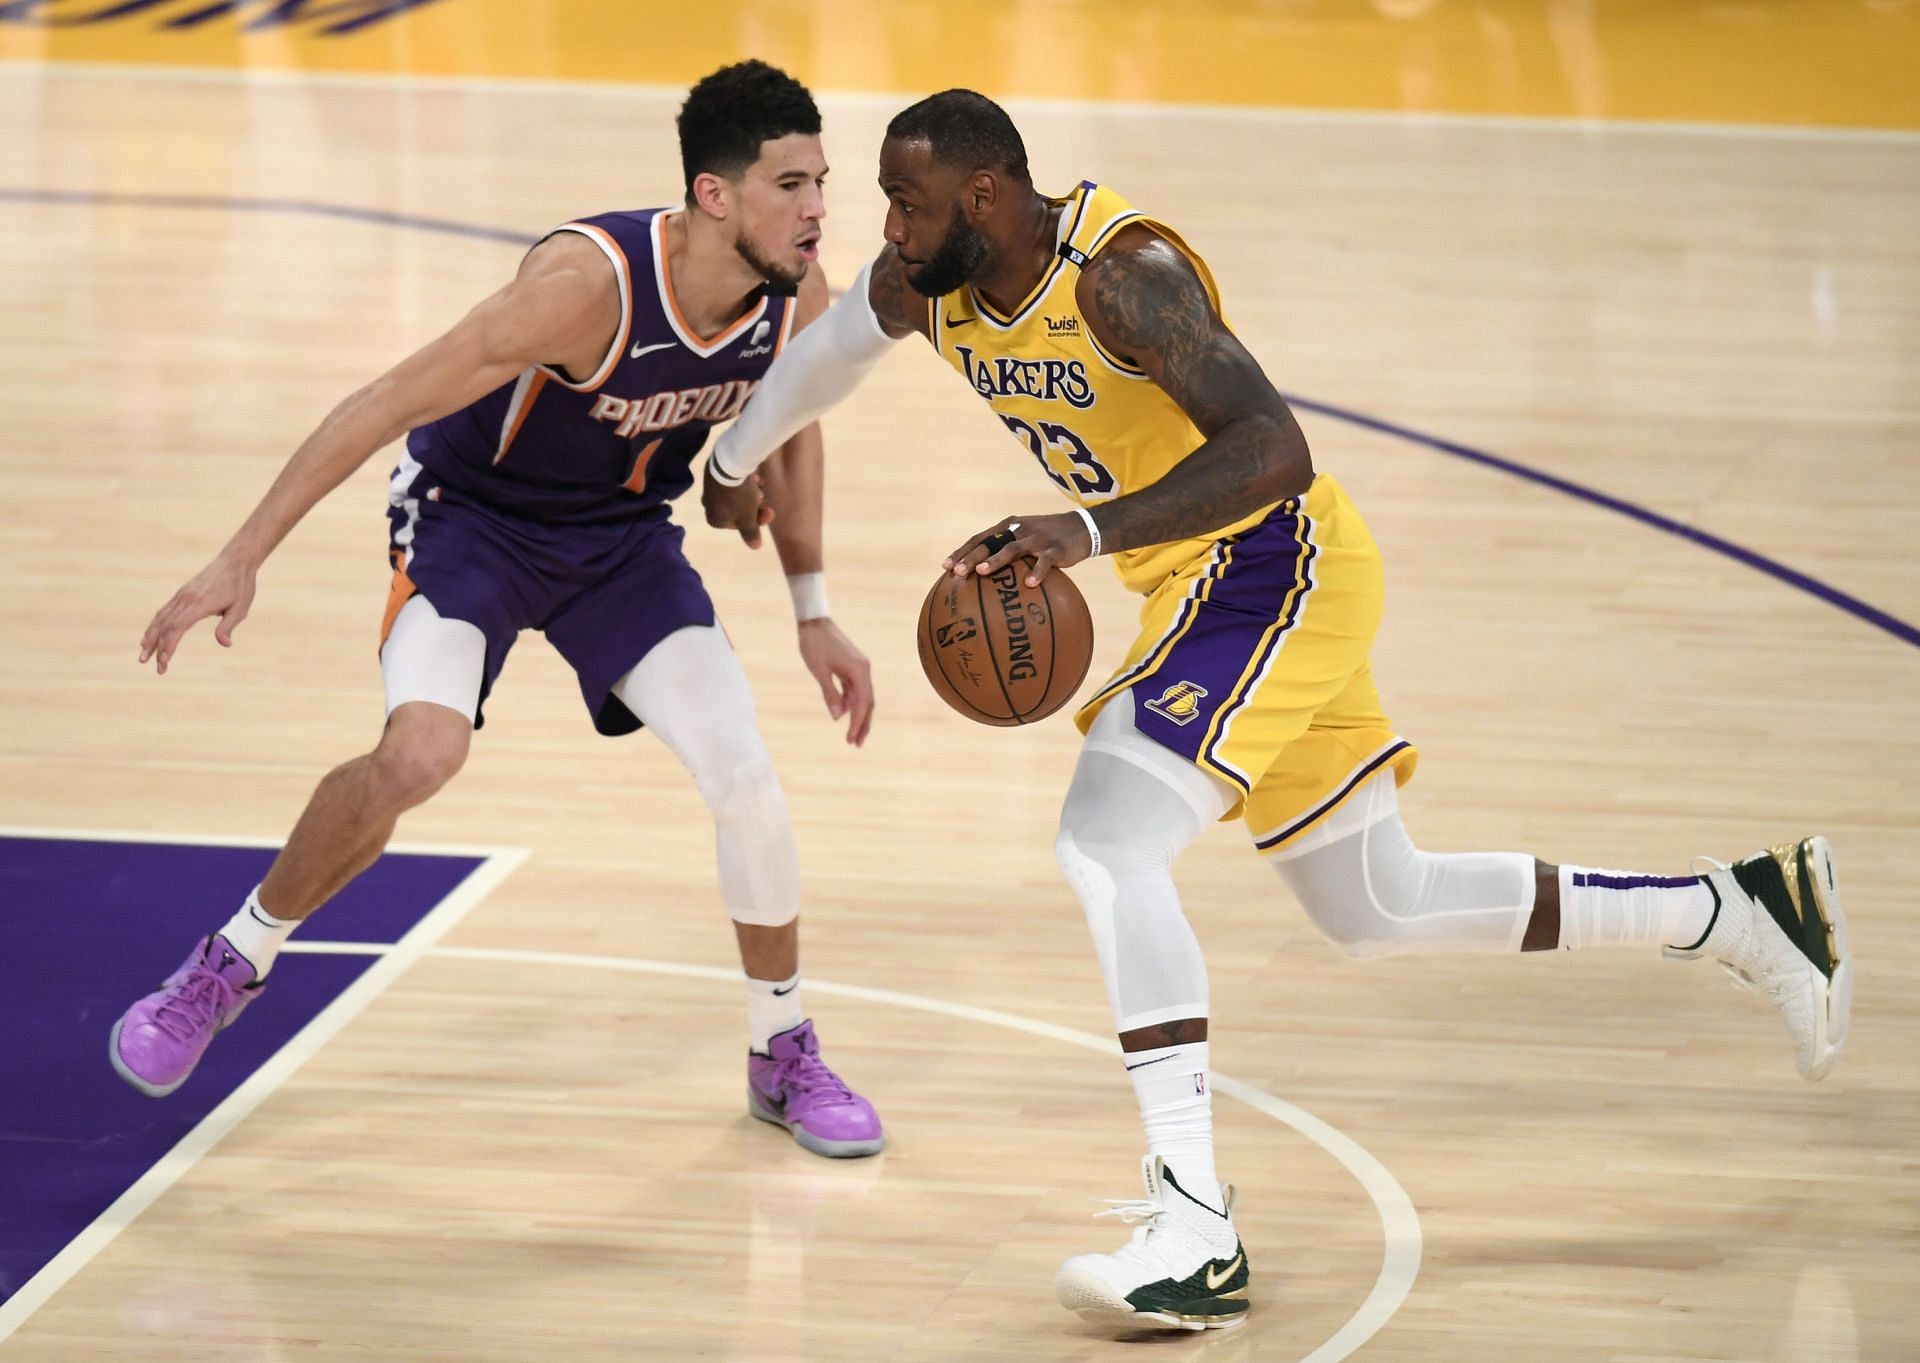 Devin Booker of the Phoenix Suns guards LeBron James of the LA Lakers